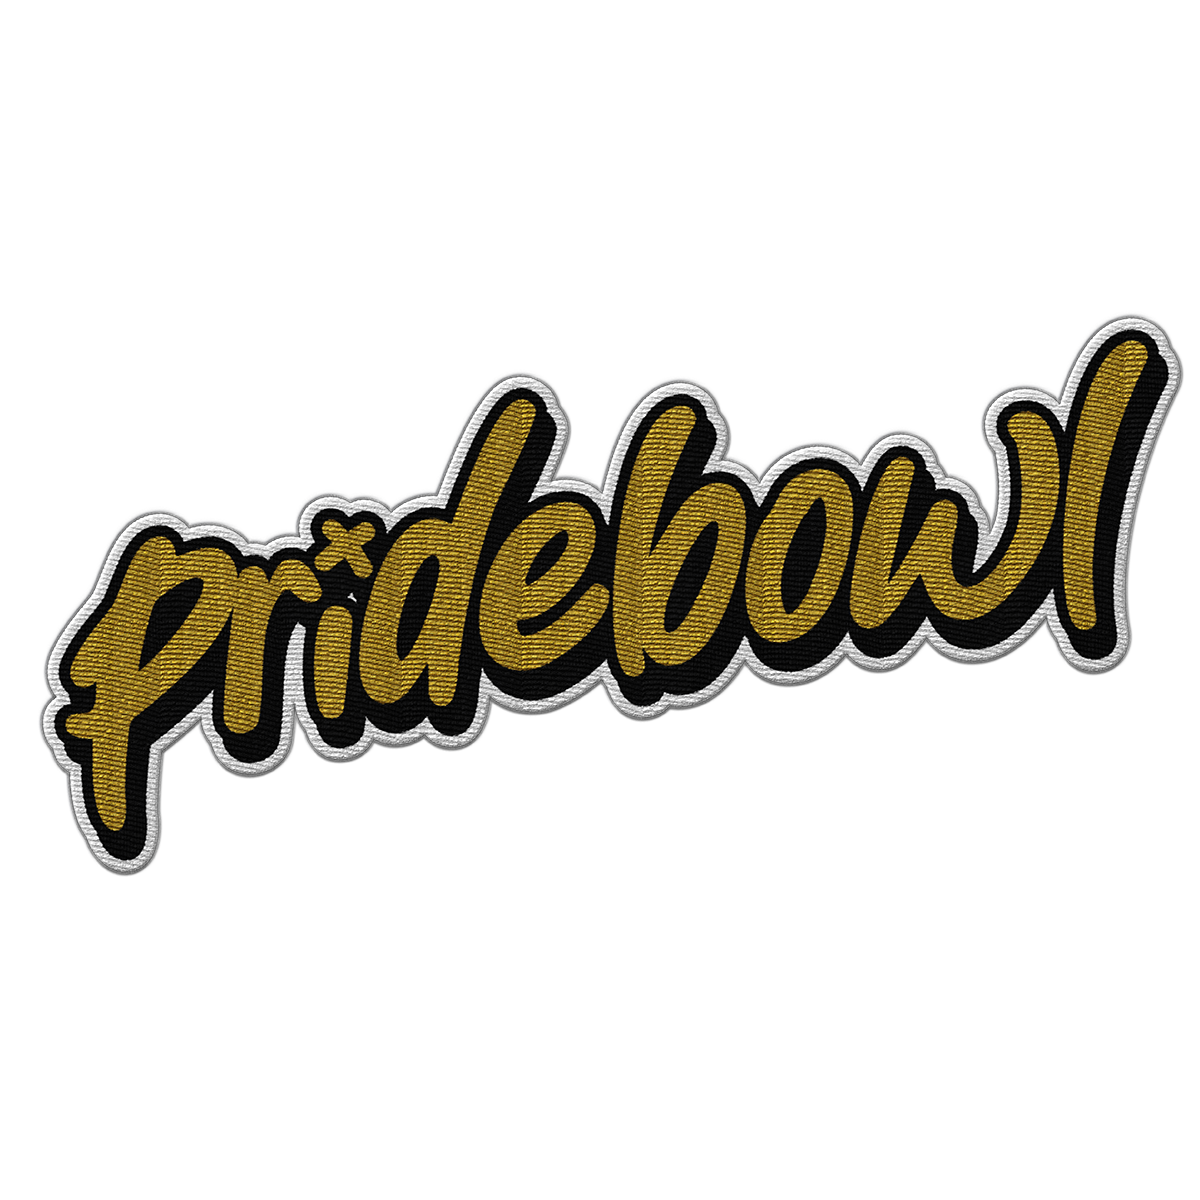 PRIDEBOWL - "Hostage Logo"  (Embroidered Patch)